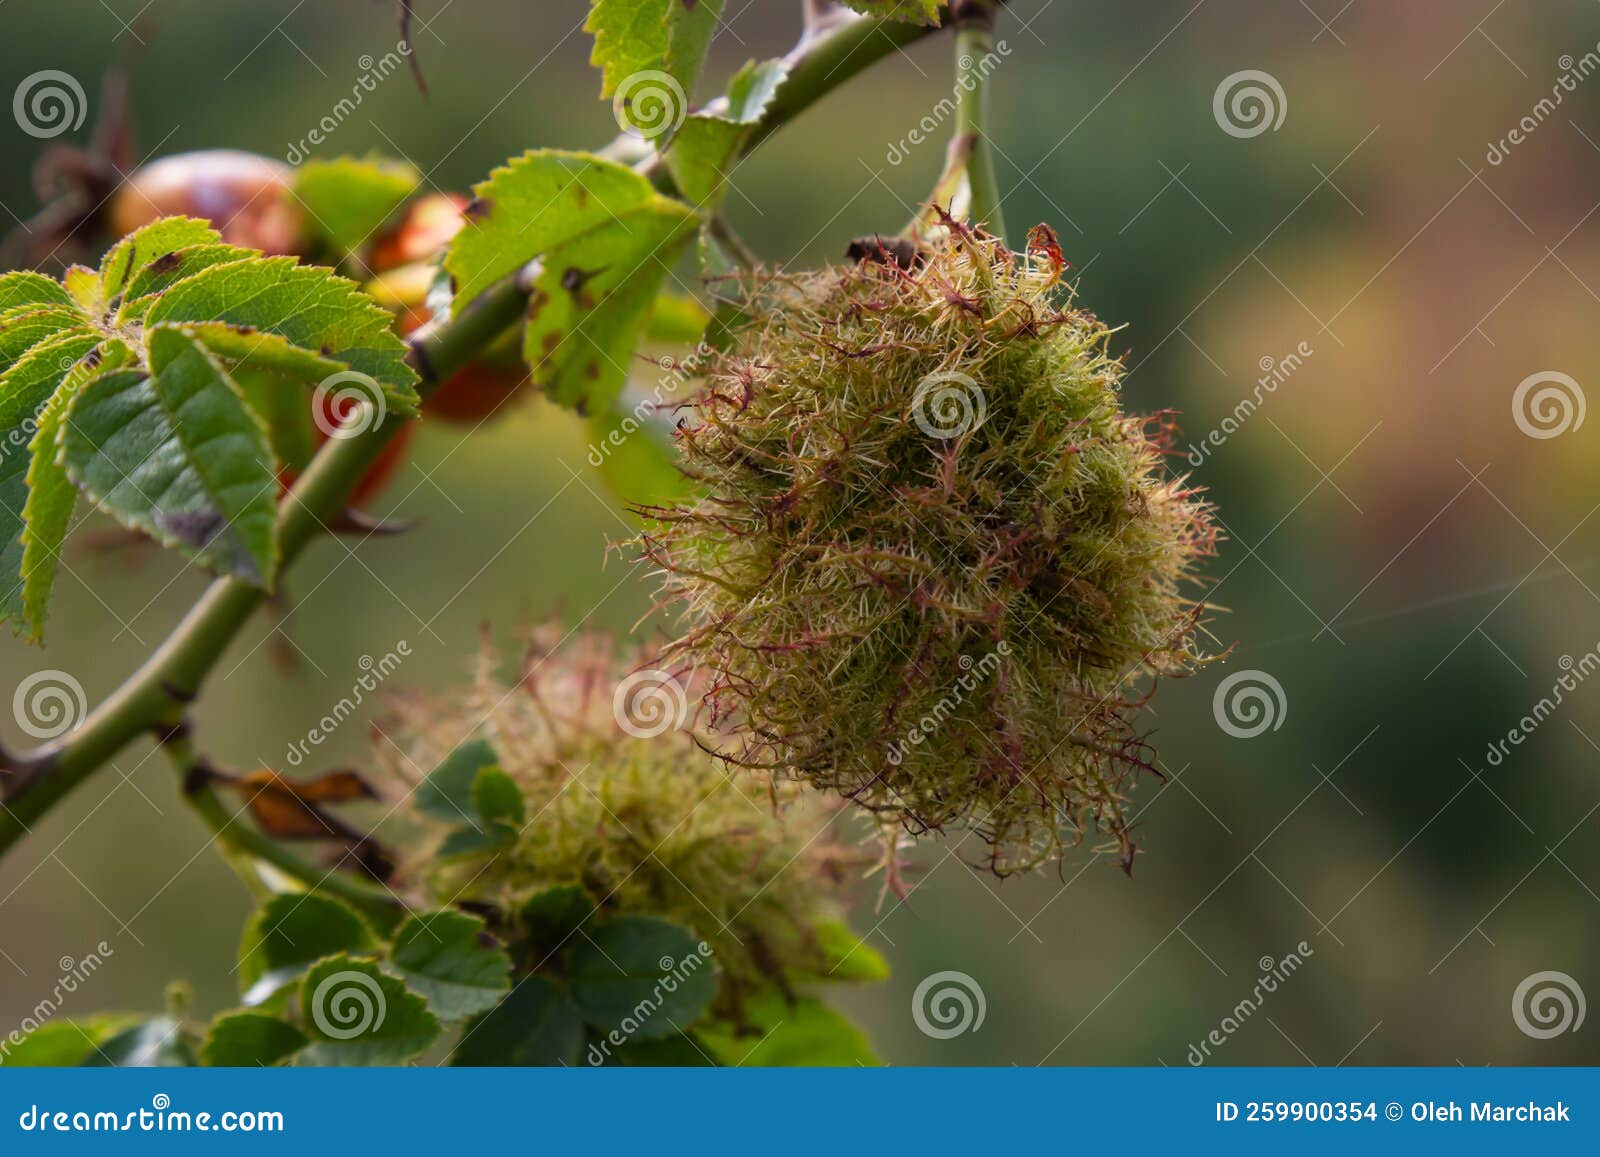 149 Pincushion Moss Images, Stock Photos, 3D objects, & Vectors